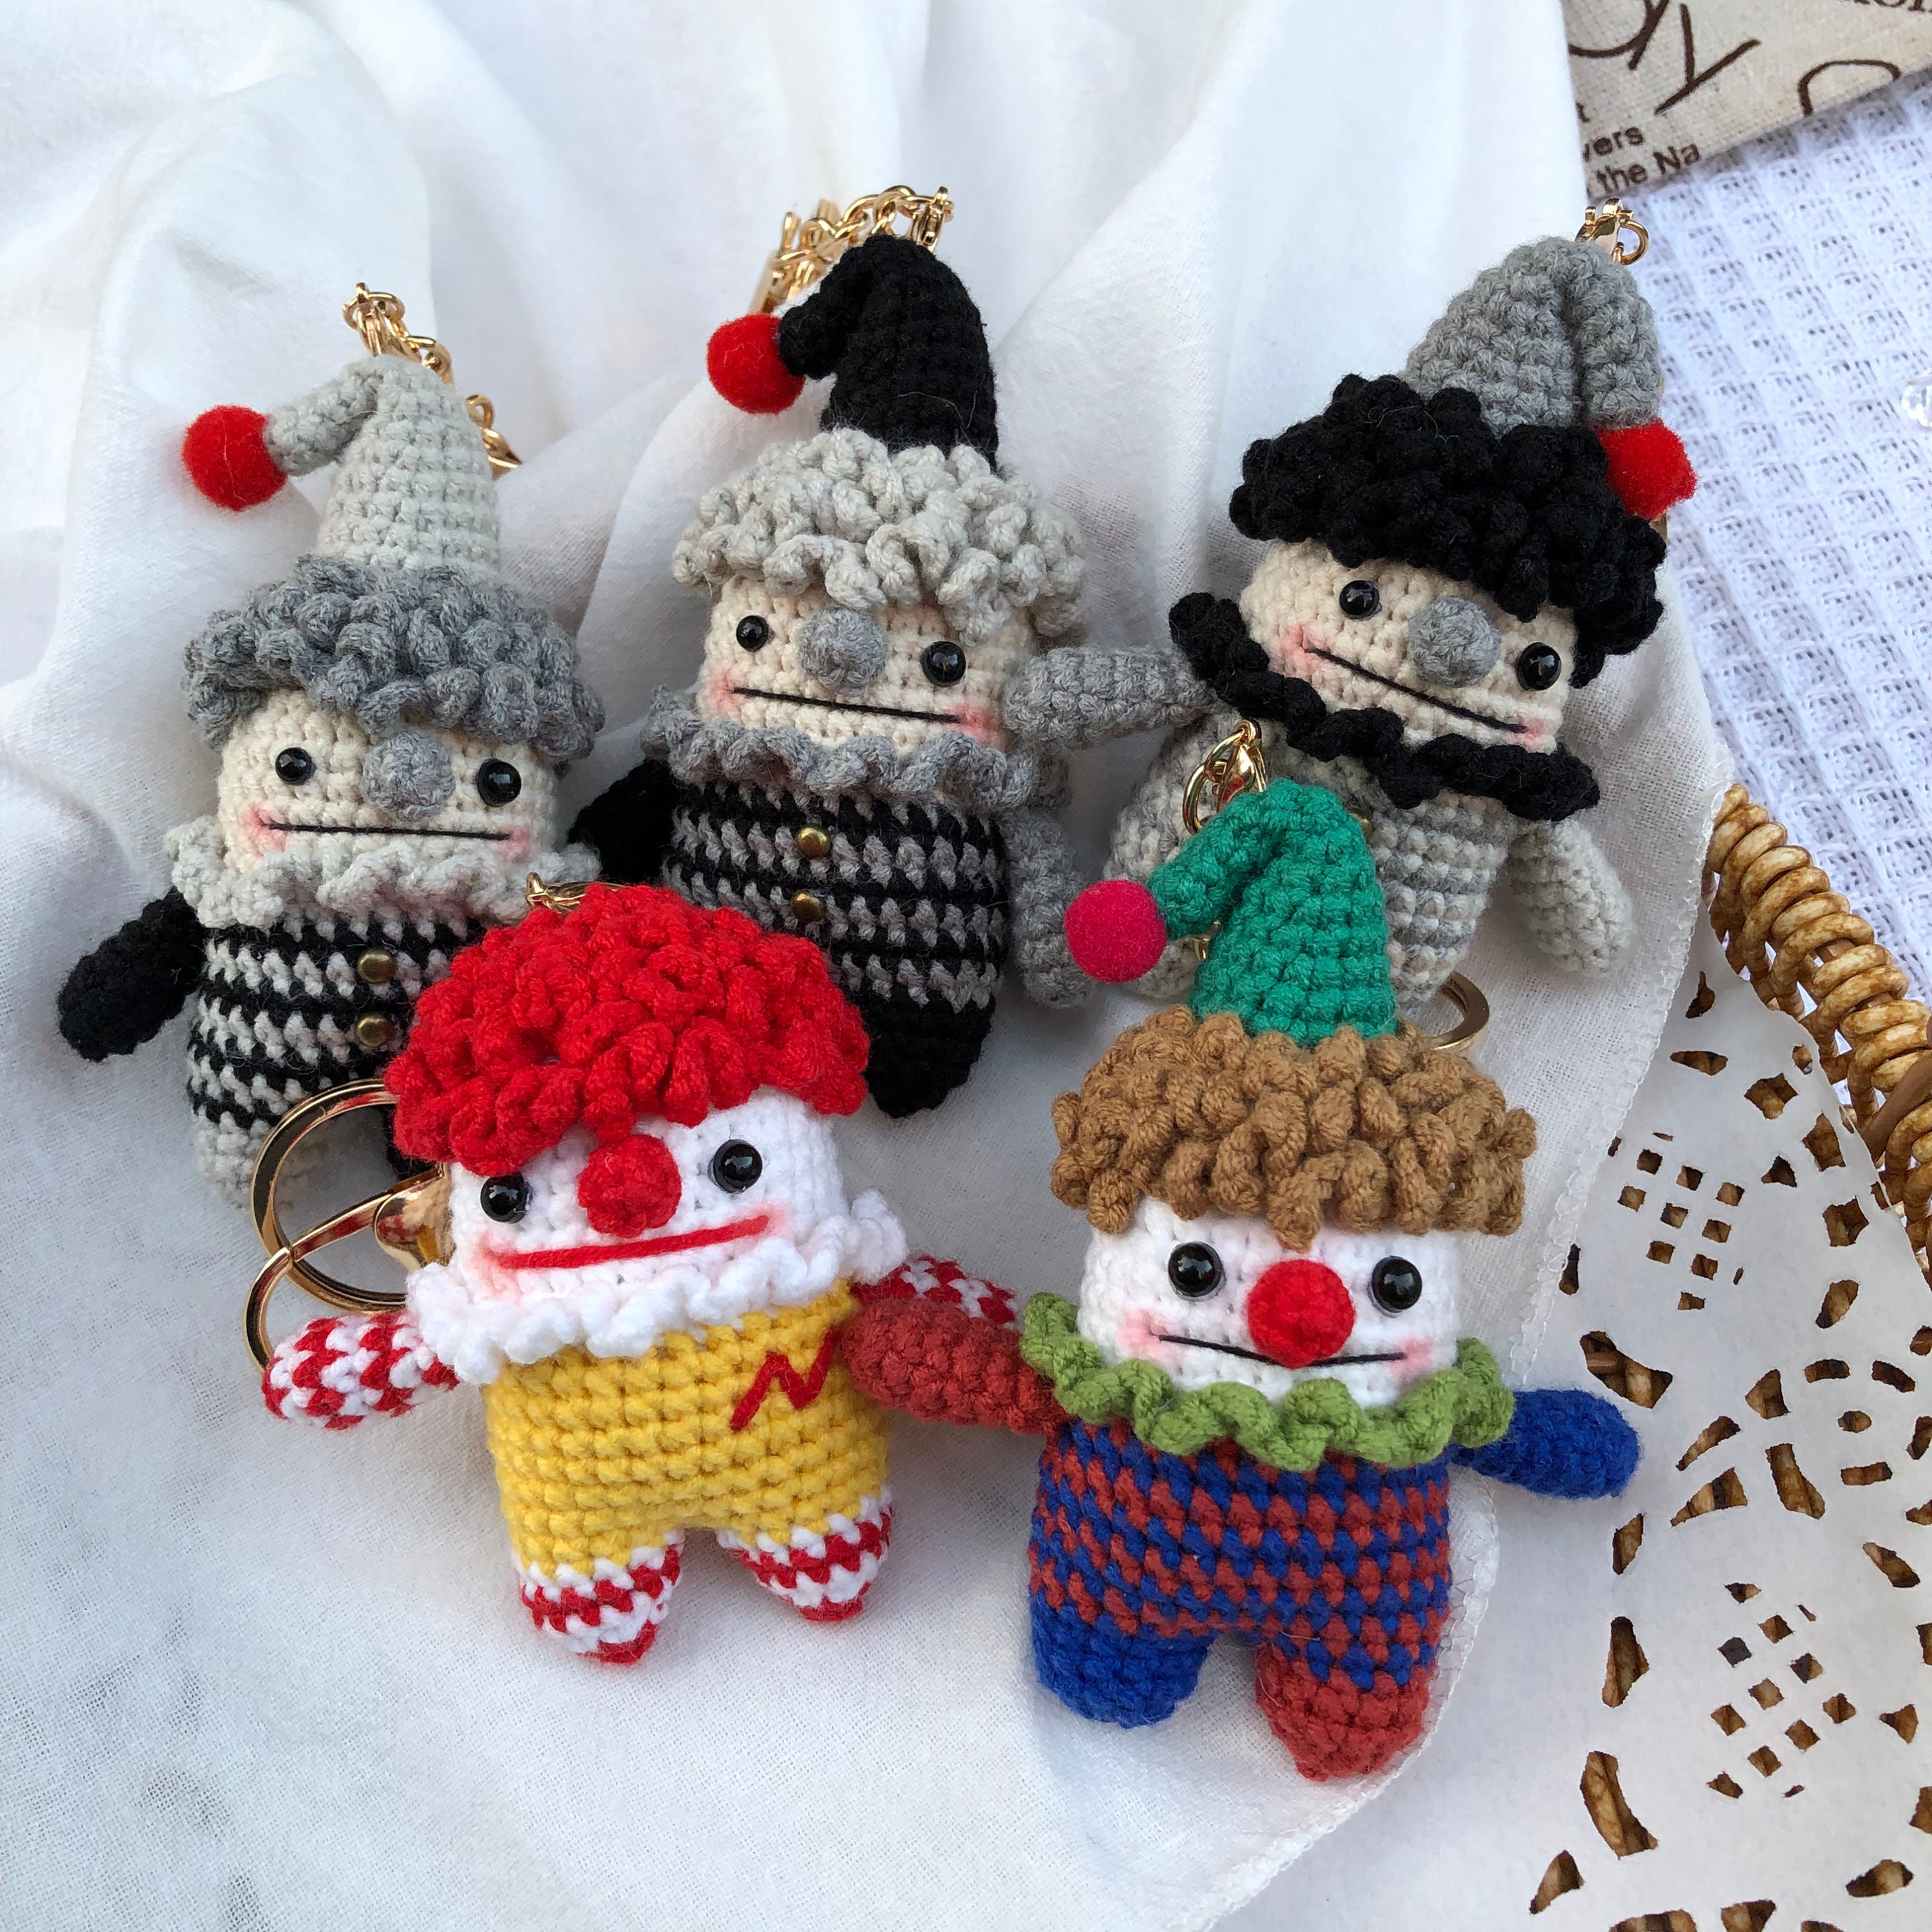 Clown Acrylic Keychain, Clowncore Aesthetic, Clown Charm, Circus Keychain,  Cute Keychain for Keys, Colorful Accessories, Quirky Gifts